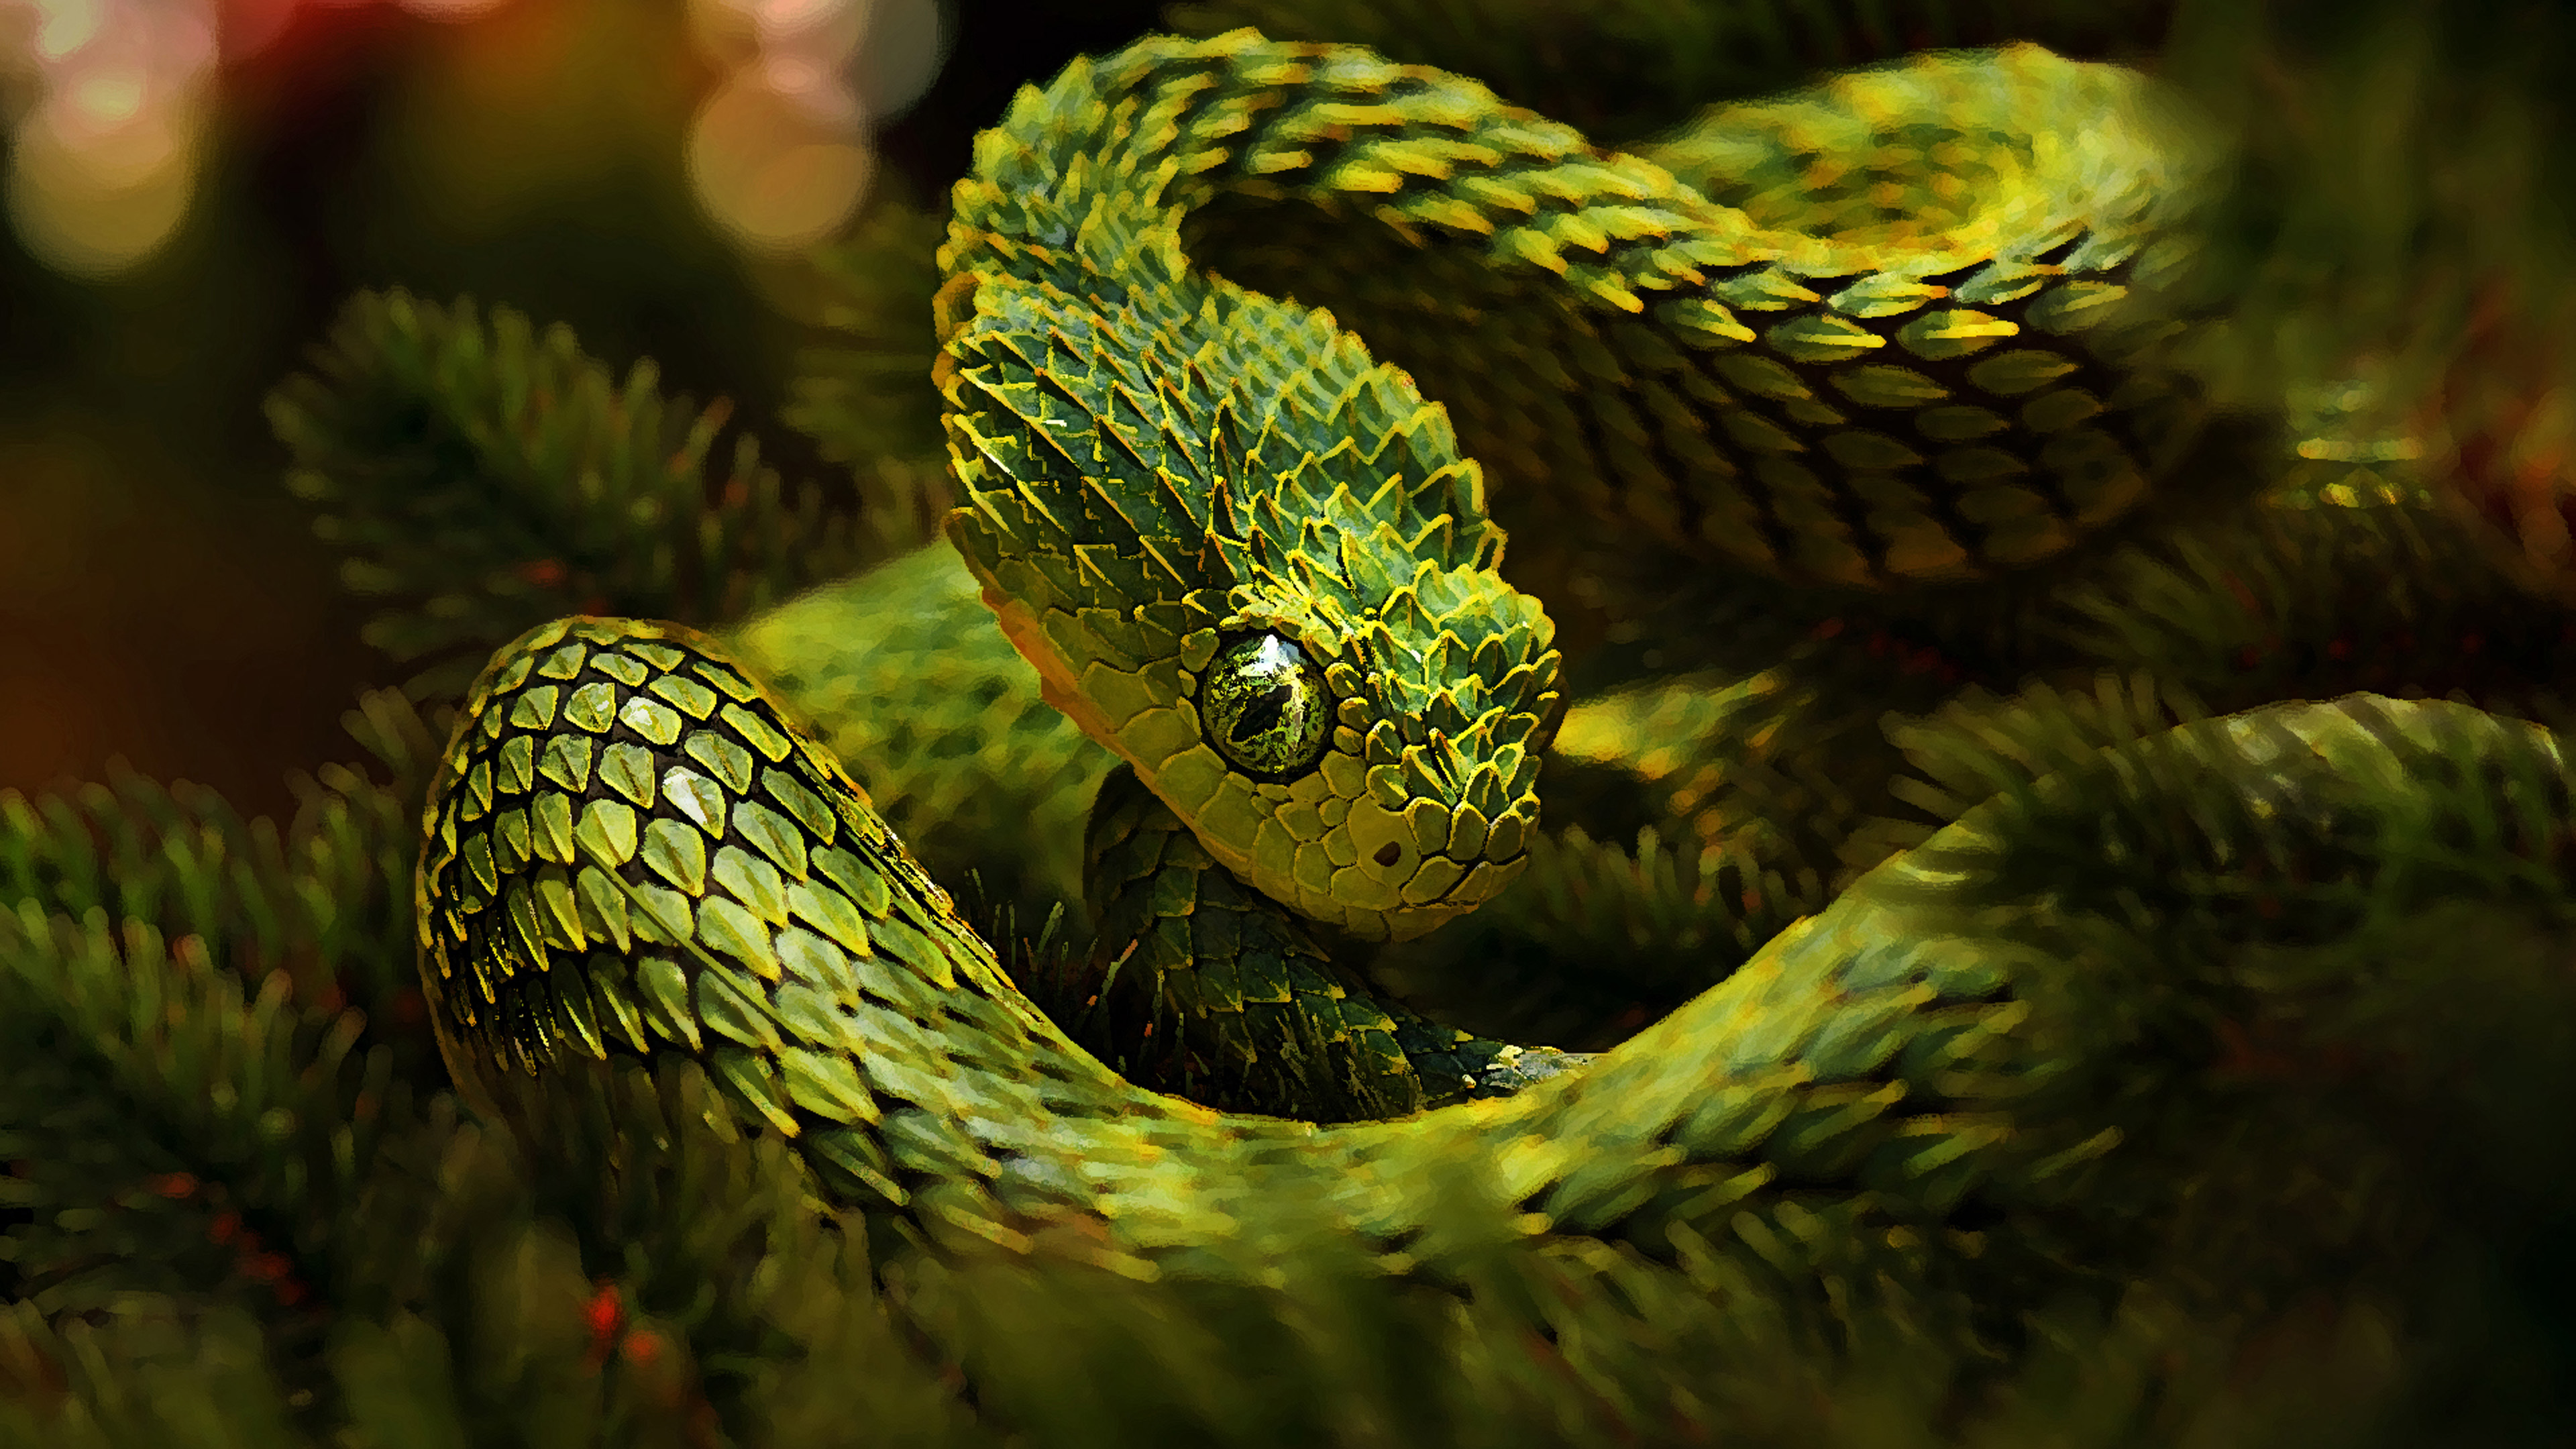 Green Unusual Snakes Cactus Camouflage Hd Wallpaper : Wallpapers13.com